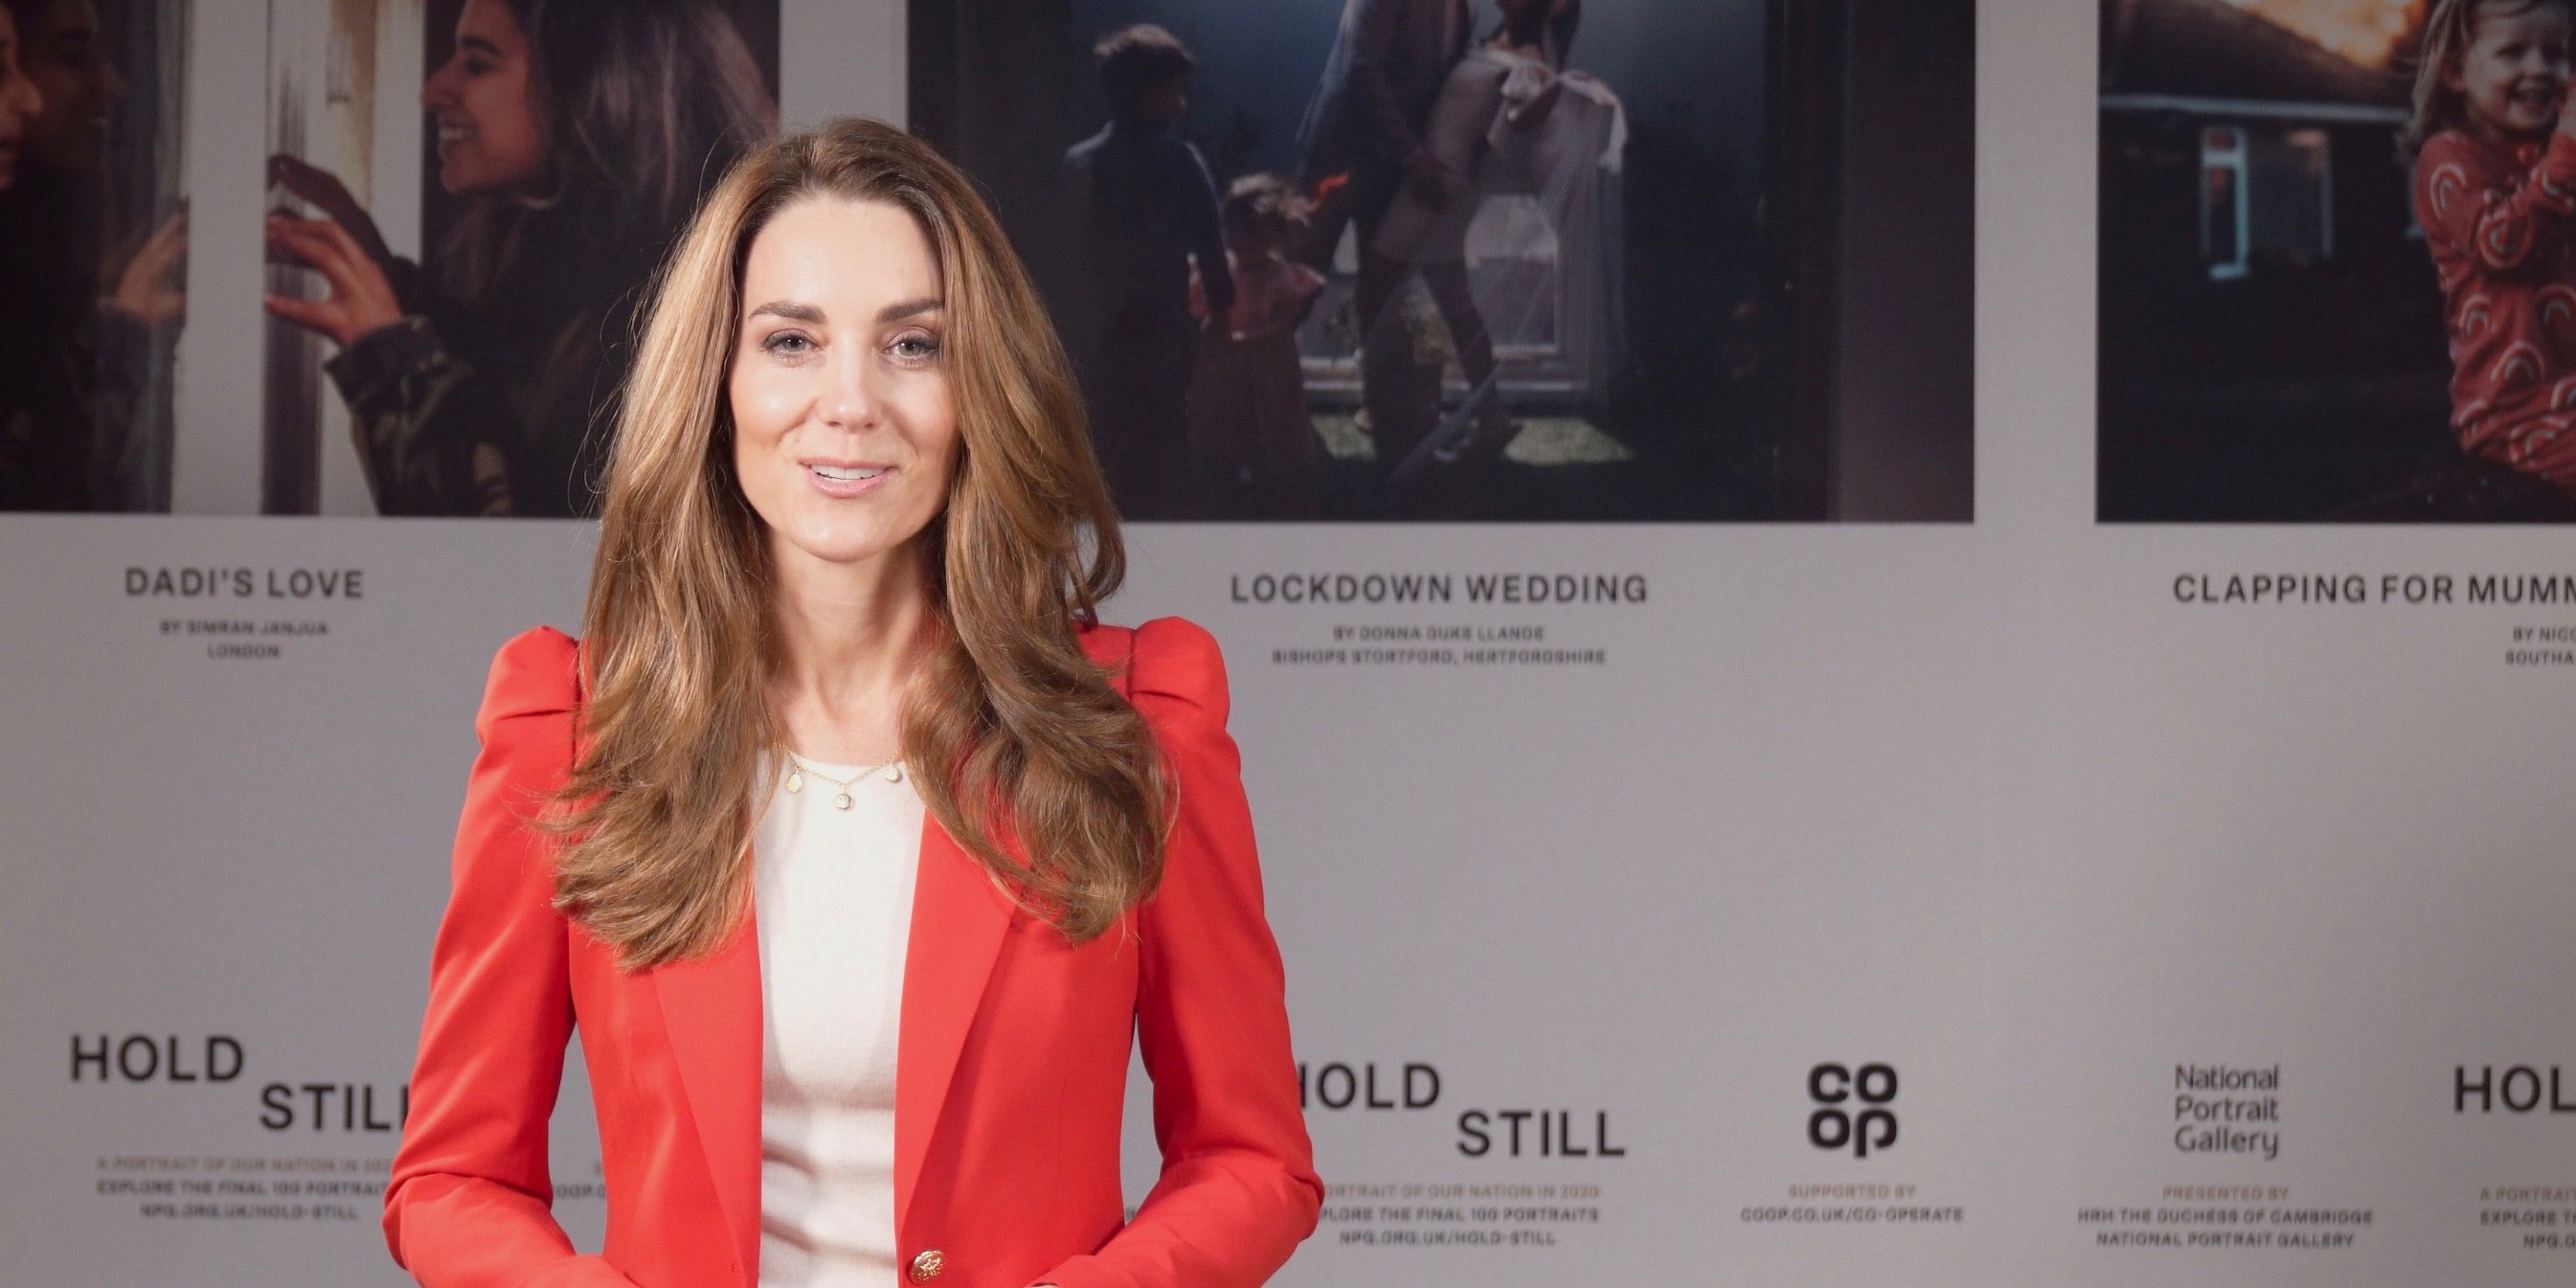 Kate Middleton Shares Special Video Message for Photo Exhibit